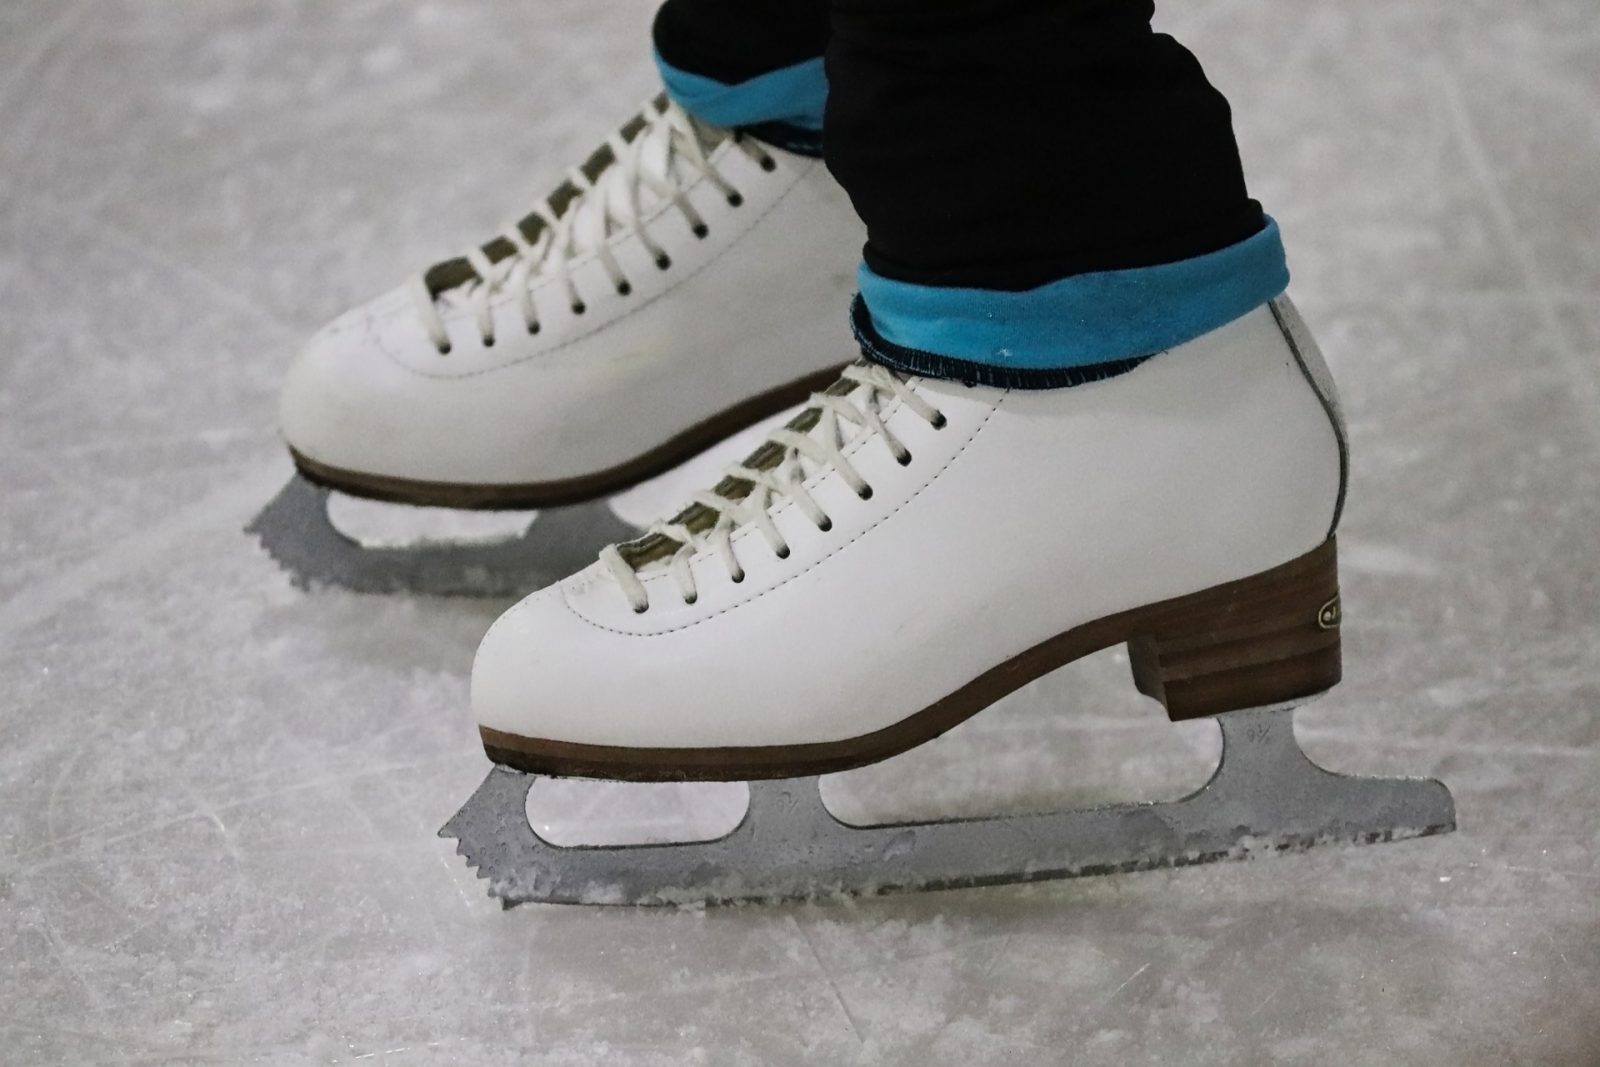 WEEKEND EVENT: Family Day Public Skate